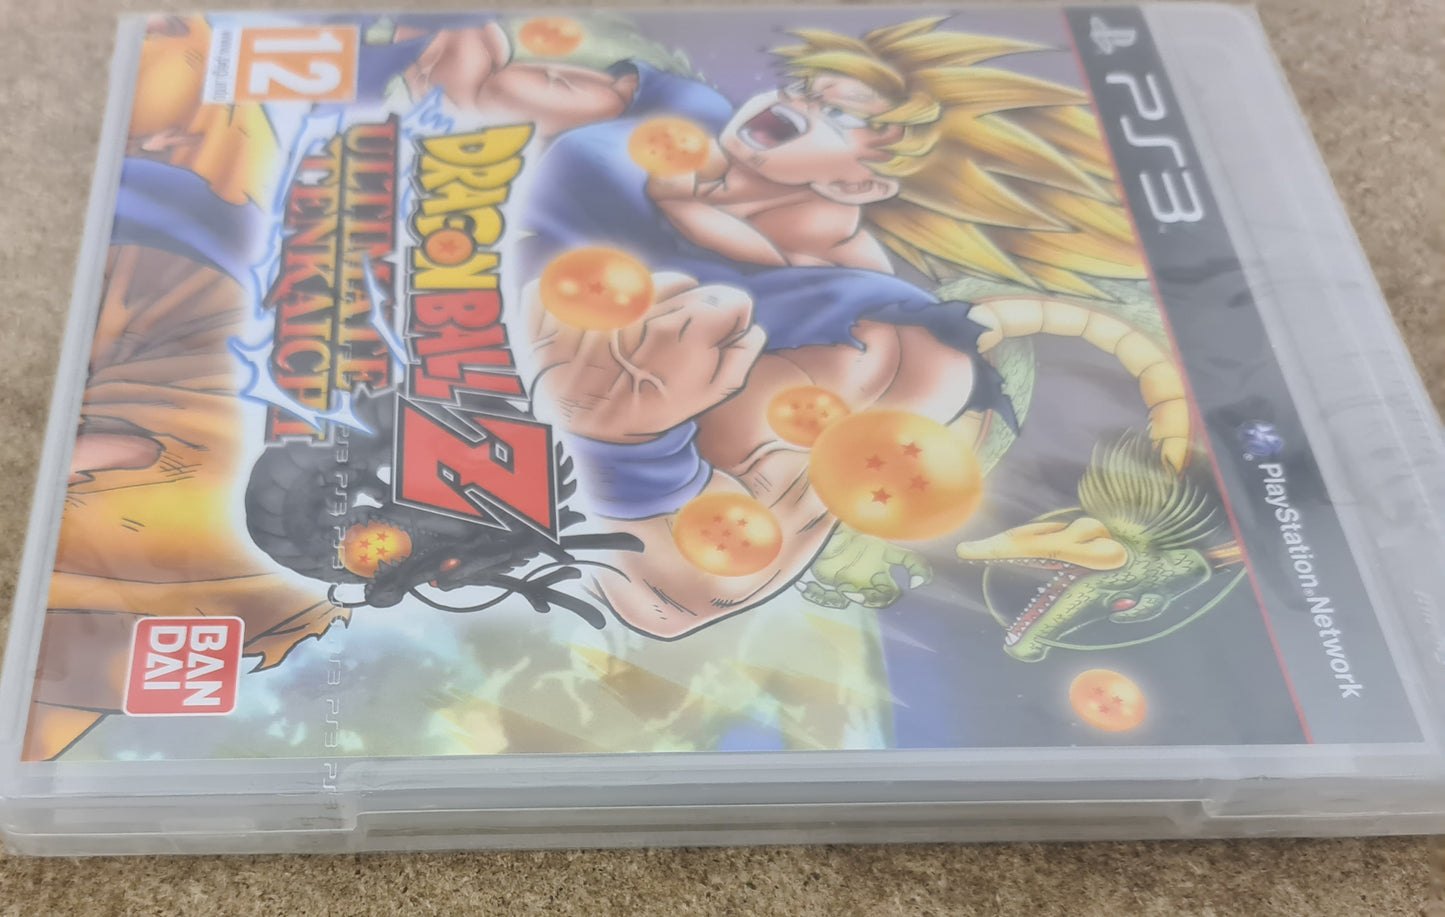 Brand New and Sealed Dragon Ball Z Ultimate Tenkaichi Sony Playstation 3 (PS3) Game